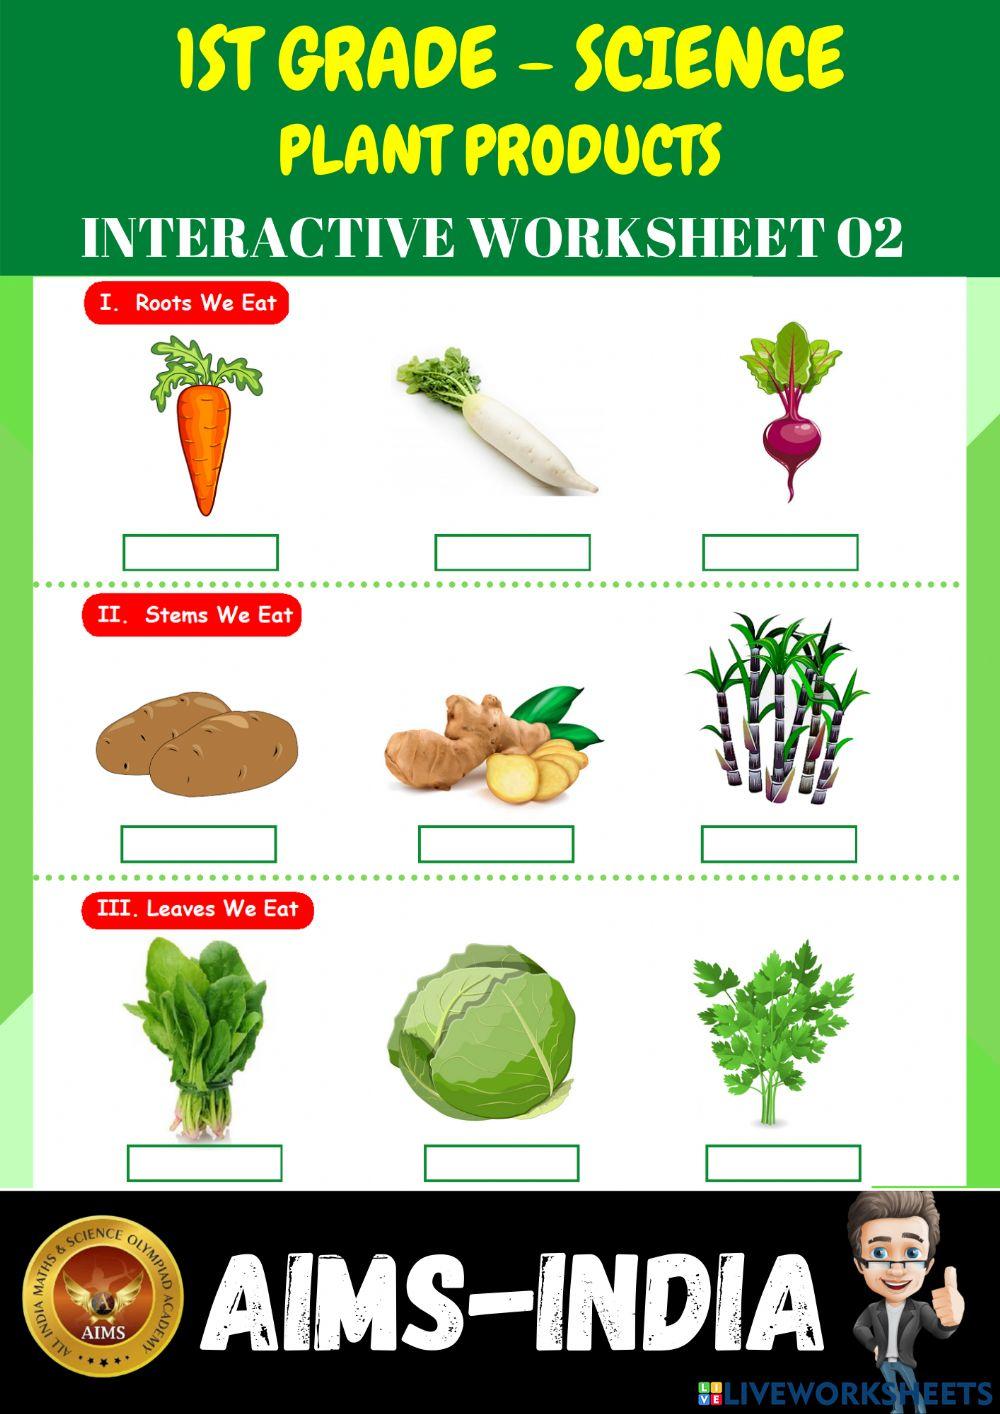 1st-science-ps02-plant products